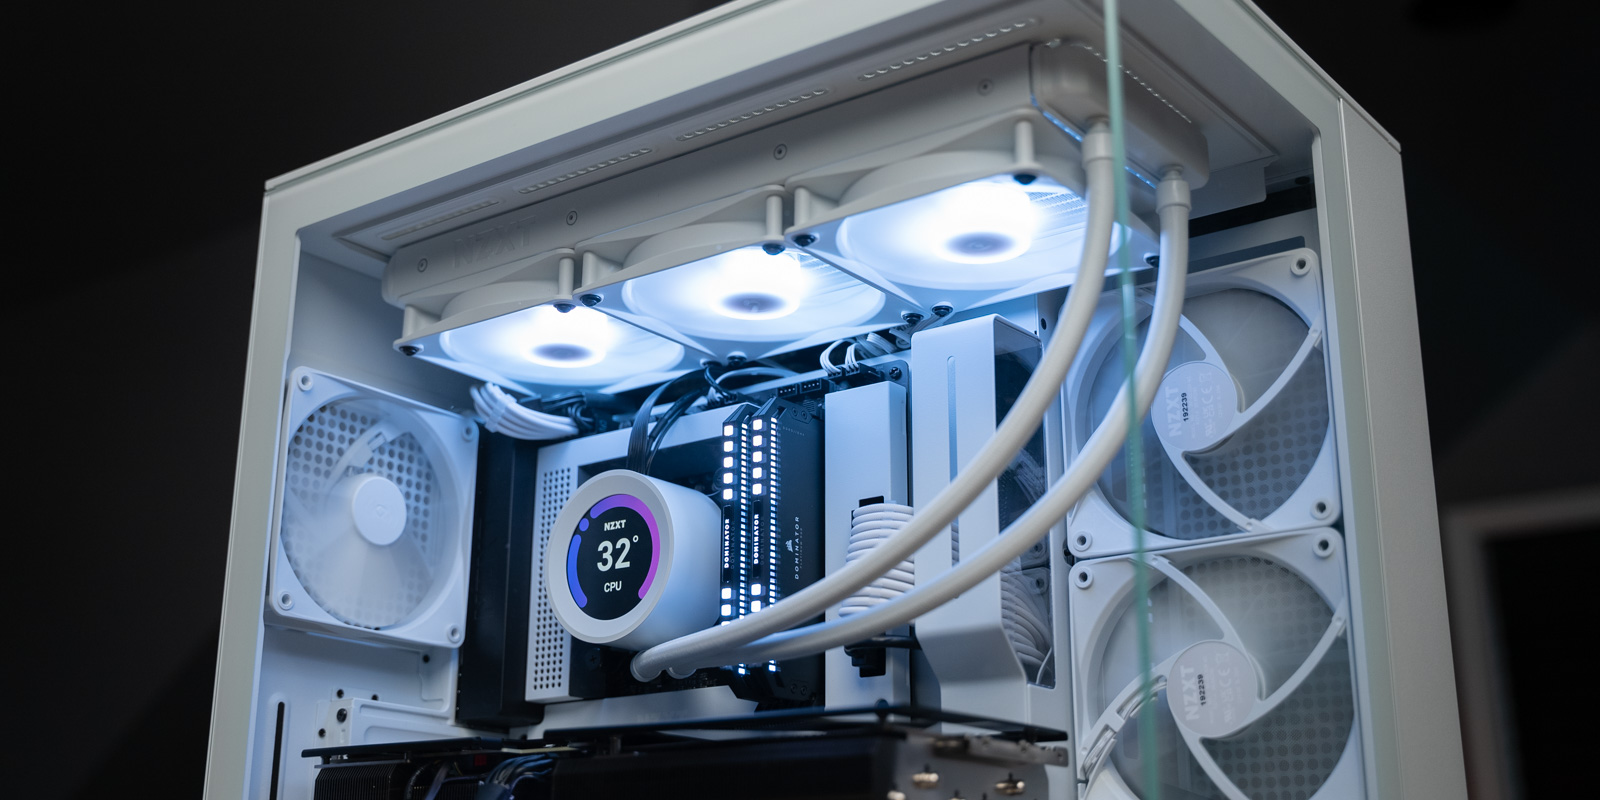 NZXT Kraken CPU Coolers are ridiculous, but you'll want one